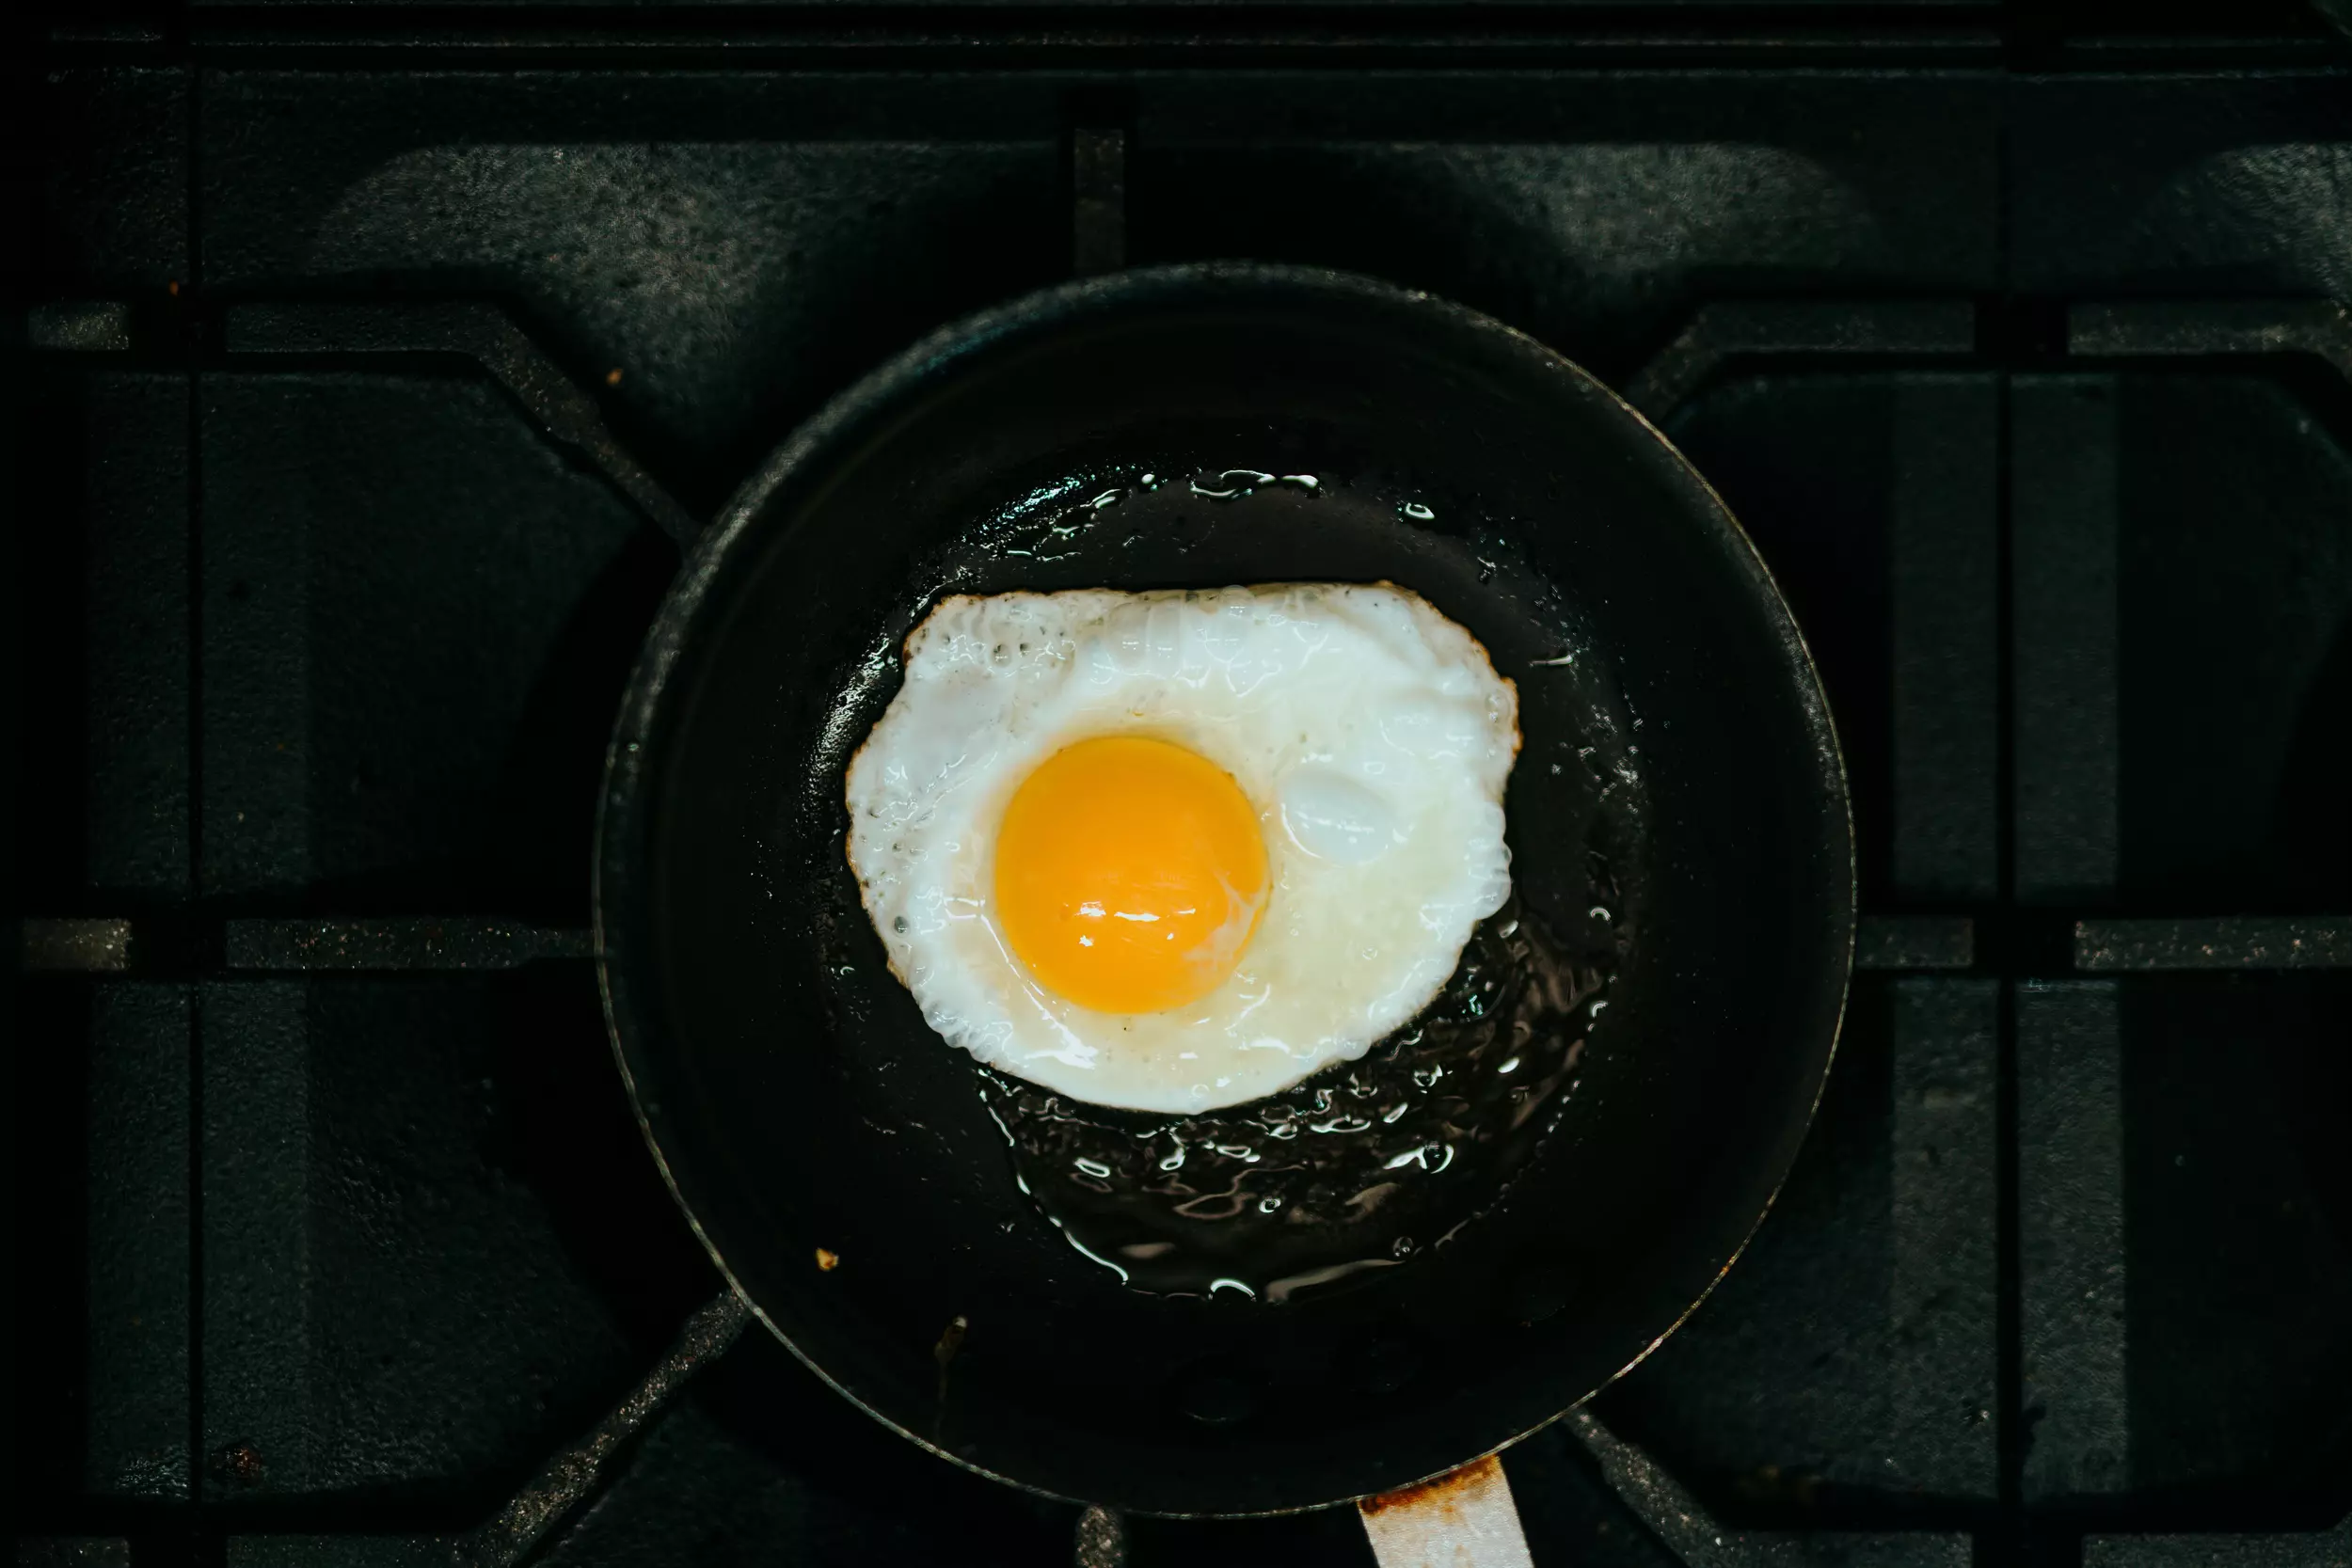 This giant cast iron skillet can theoretically fry 650 eggs at once